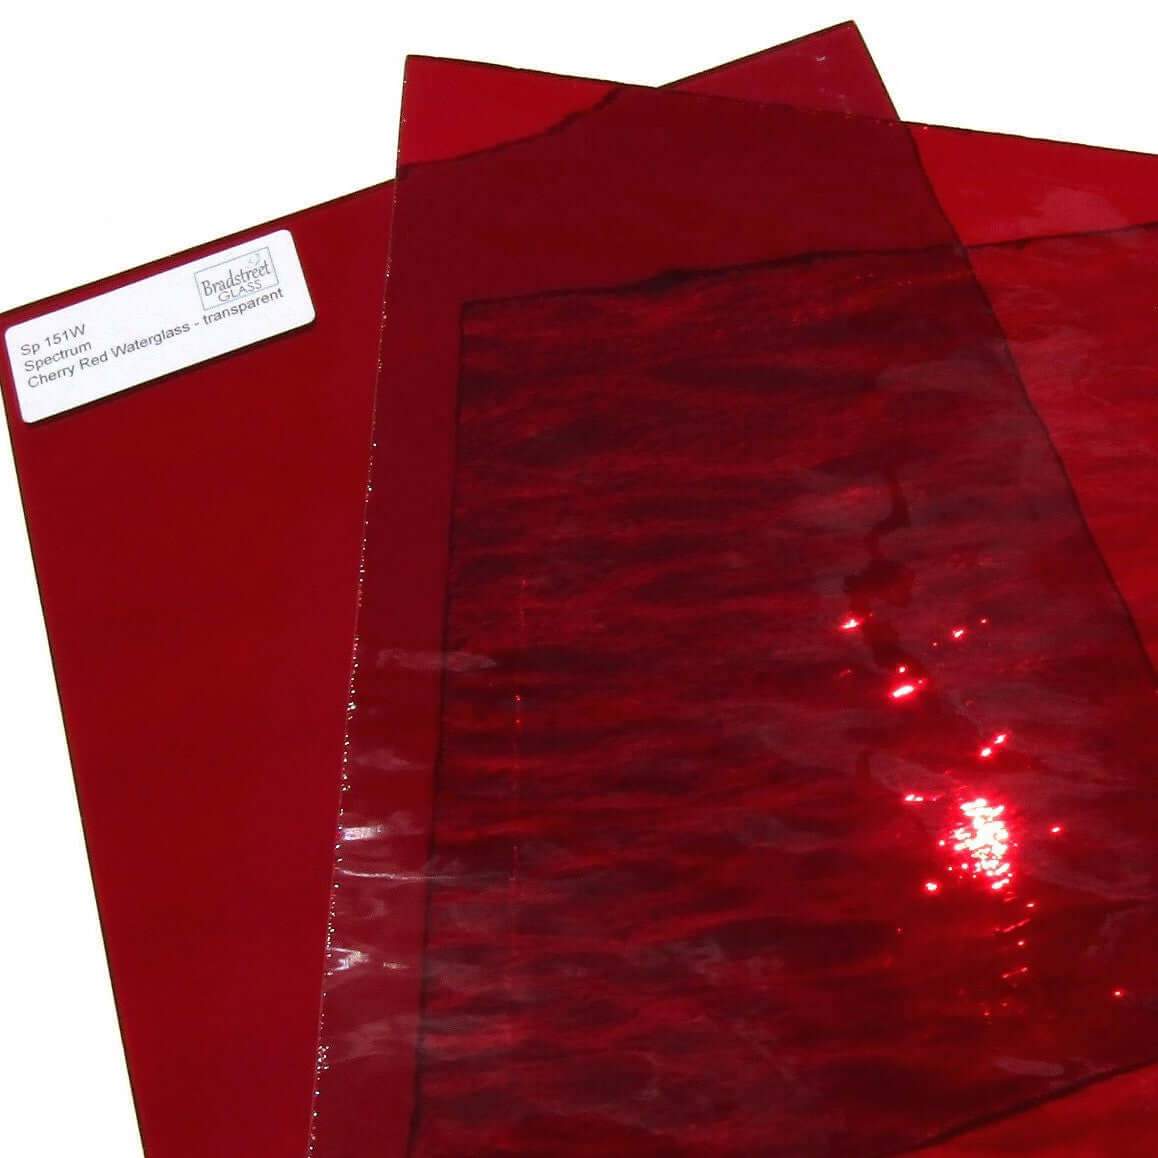 Spectrum Cherry Red Waterglass Translucent Cathedral Stained Glass Sheet 151W